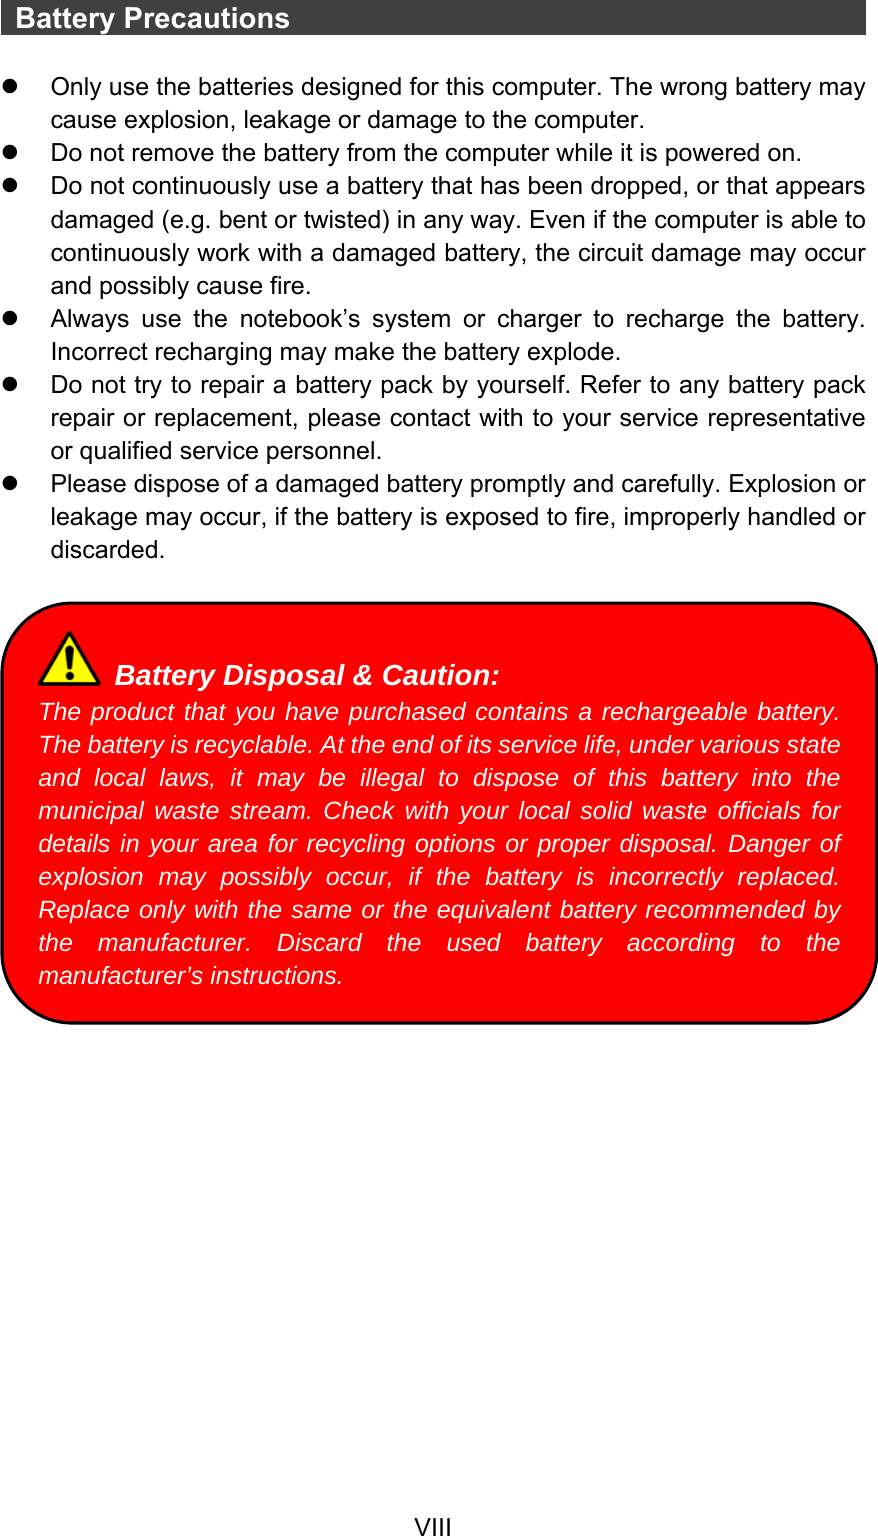  VIII  Battery Precautions                                            z  Only use the batteries designed for this computer. The wrong battery may cause explosion, leakage or damage to the computer. z  Do not remove the battery from the computer while it is powered on. z  Do not continuously use a battery that has been dropped, or that appears damaged (e.g. bent or twisted) in any way. Even if the computer is able to continuously work with a damaged battery, the circuit damage may occur and possibly cause fire. z  Always use the notebook’s system or charger to recharge the battery. Incorrect recharging may make the battery explode. z  Do not try to repair a battery pack by yourself. Refer to any battery pack repair or replacement, please contact with to your service representative or qualified service personnel. z  Please dispose of a damaged battery promptly and carefully. Explosion or leakage may occur, if the battery is exposed to fire, improperly handled or discarded.     Battery Disposal &amp; Caution: The product that you have purchased contains a rechargeable battery. The battery is recyclable. At the end of its service life, under various state and local laws, it may be illegal to dispose of this battery into the municipal waste stream. Check with your local solid waste officials for details in your area for recycling options or proper disposal. Danger of explosion may possibly occur, if the battery is incorrectly replaced. Replace only with the same or the equivalent battery recommended by the manufacturer. Discard the used battery according to the manufacturer’s instructions. 